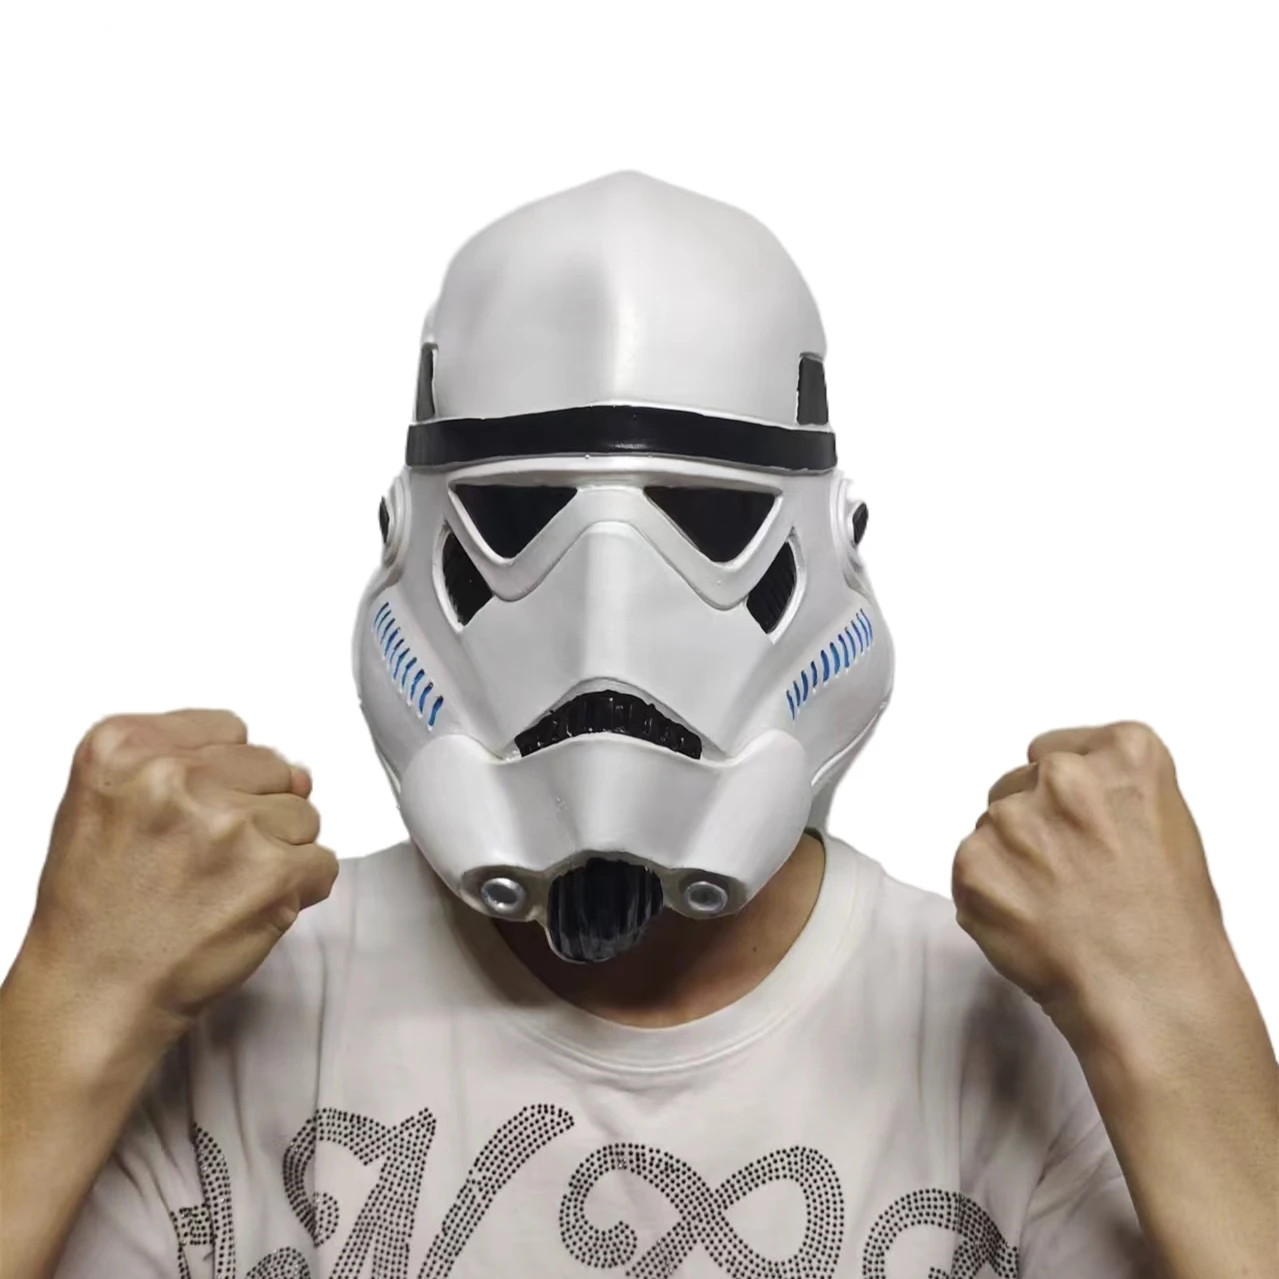 imperial-stormtrooper-helmet-guard-mask-starwar-cosplay-imperial-armour-costume-halloween-funny-dress-props-for-adult